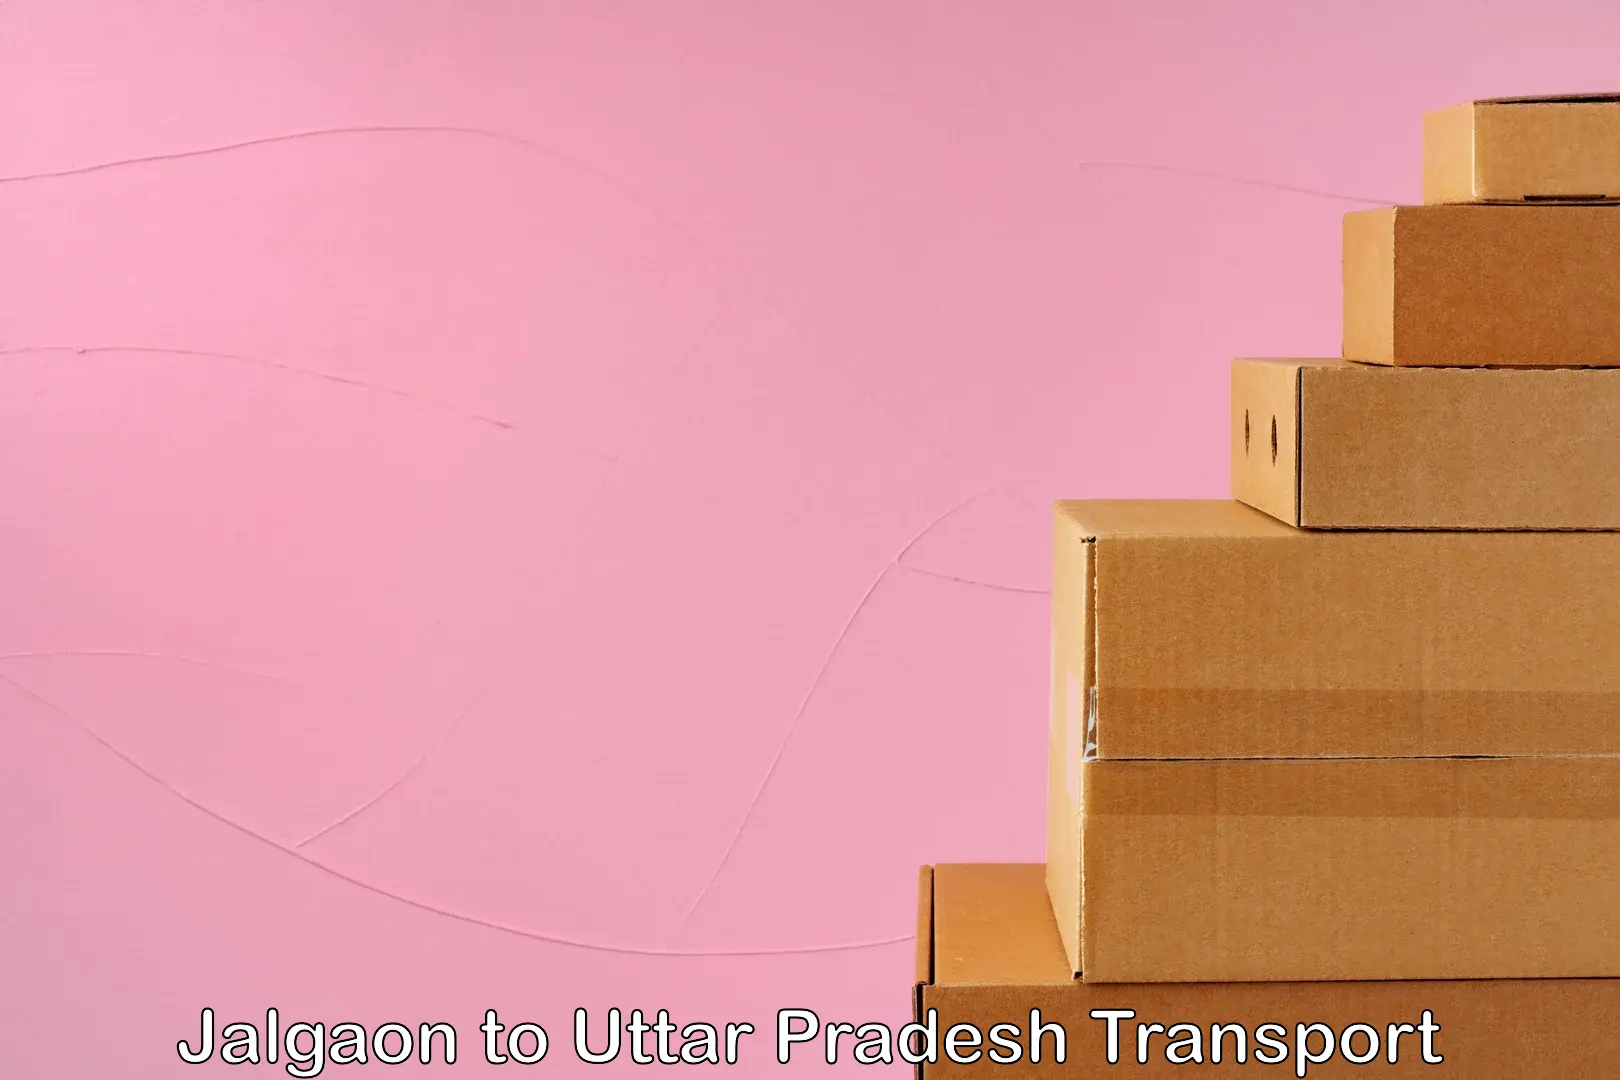 Express transport services in Jalgaon to Sonbhadra